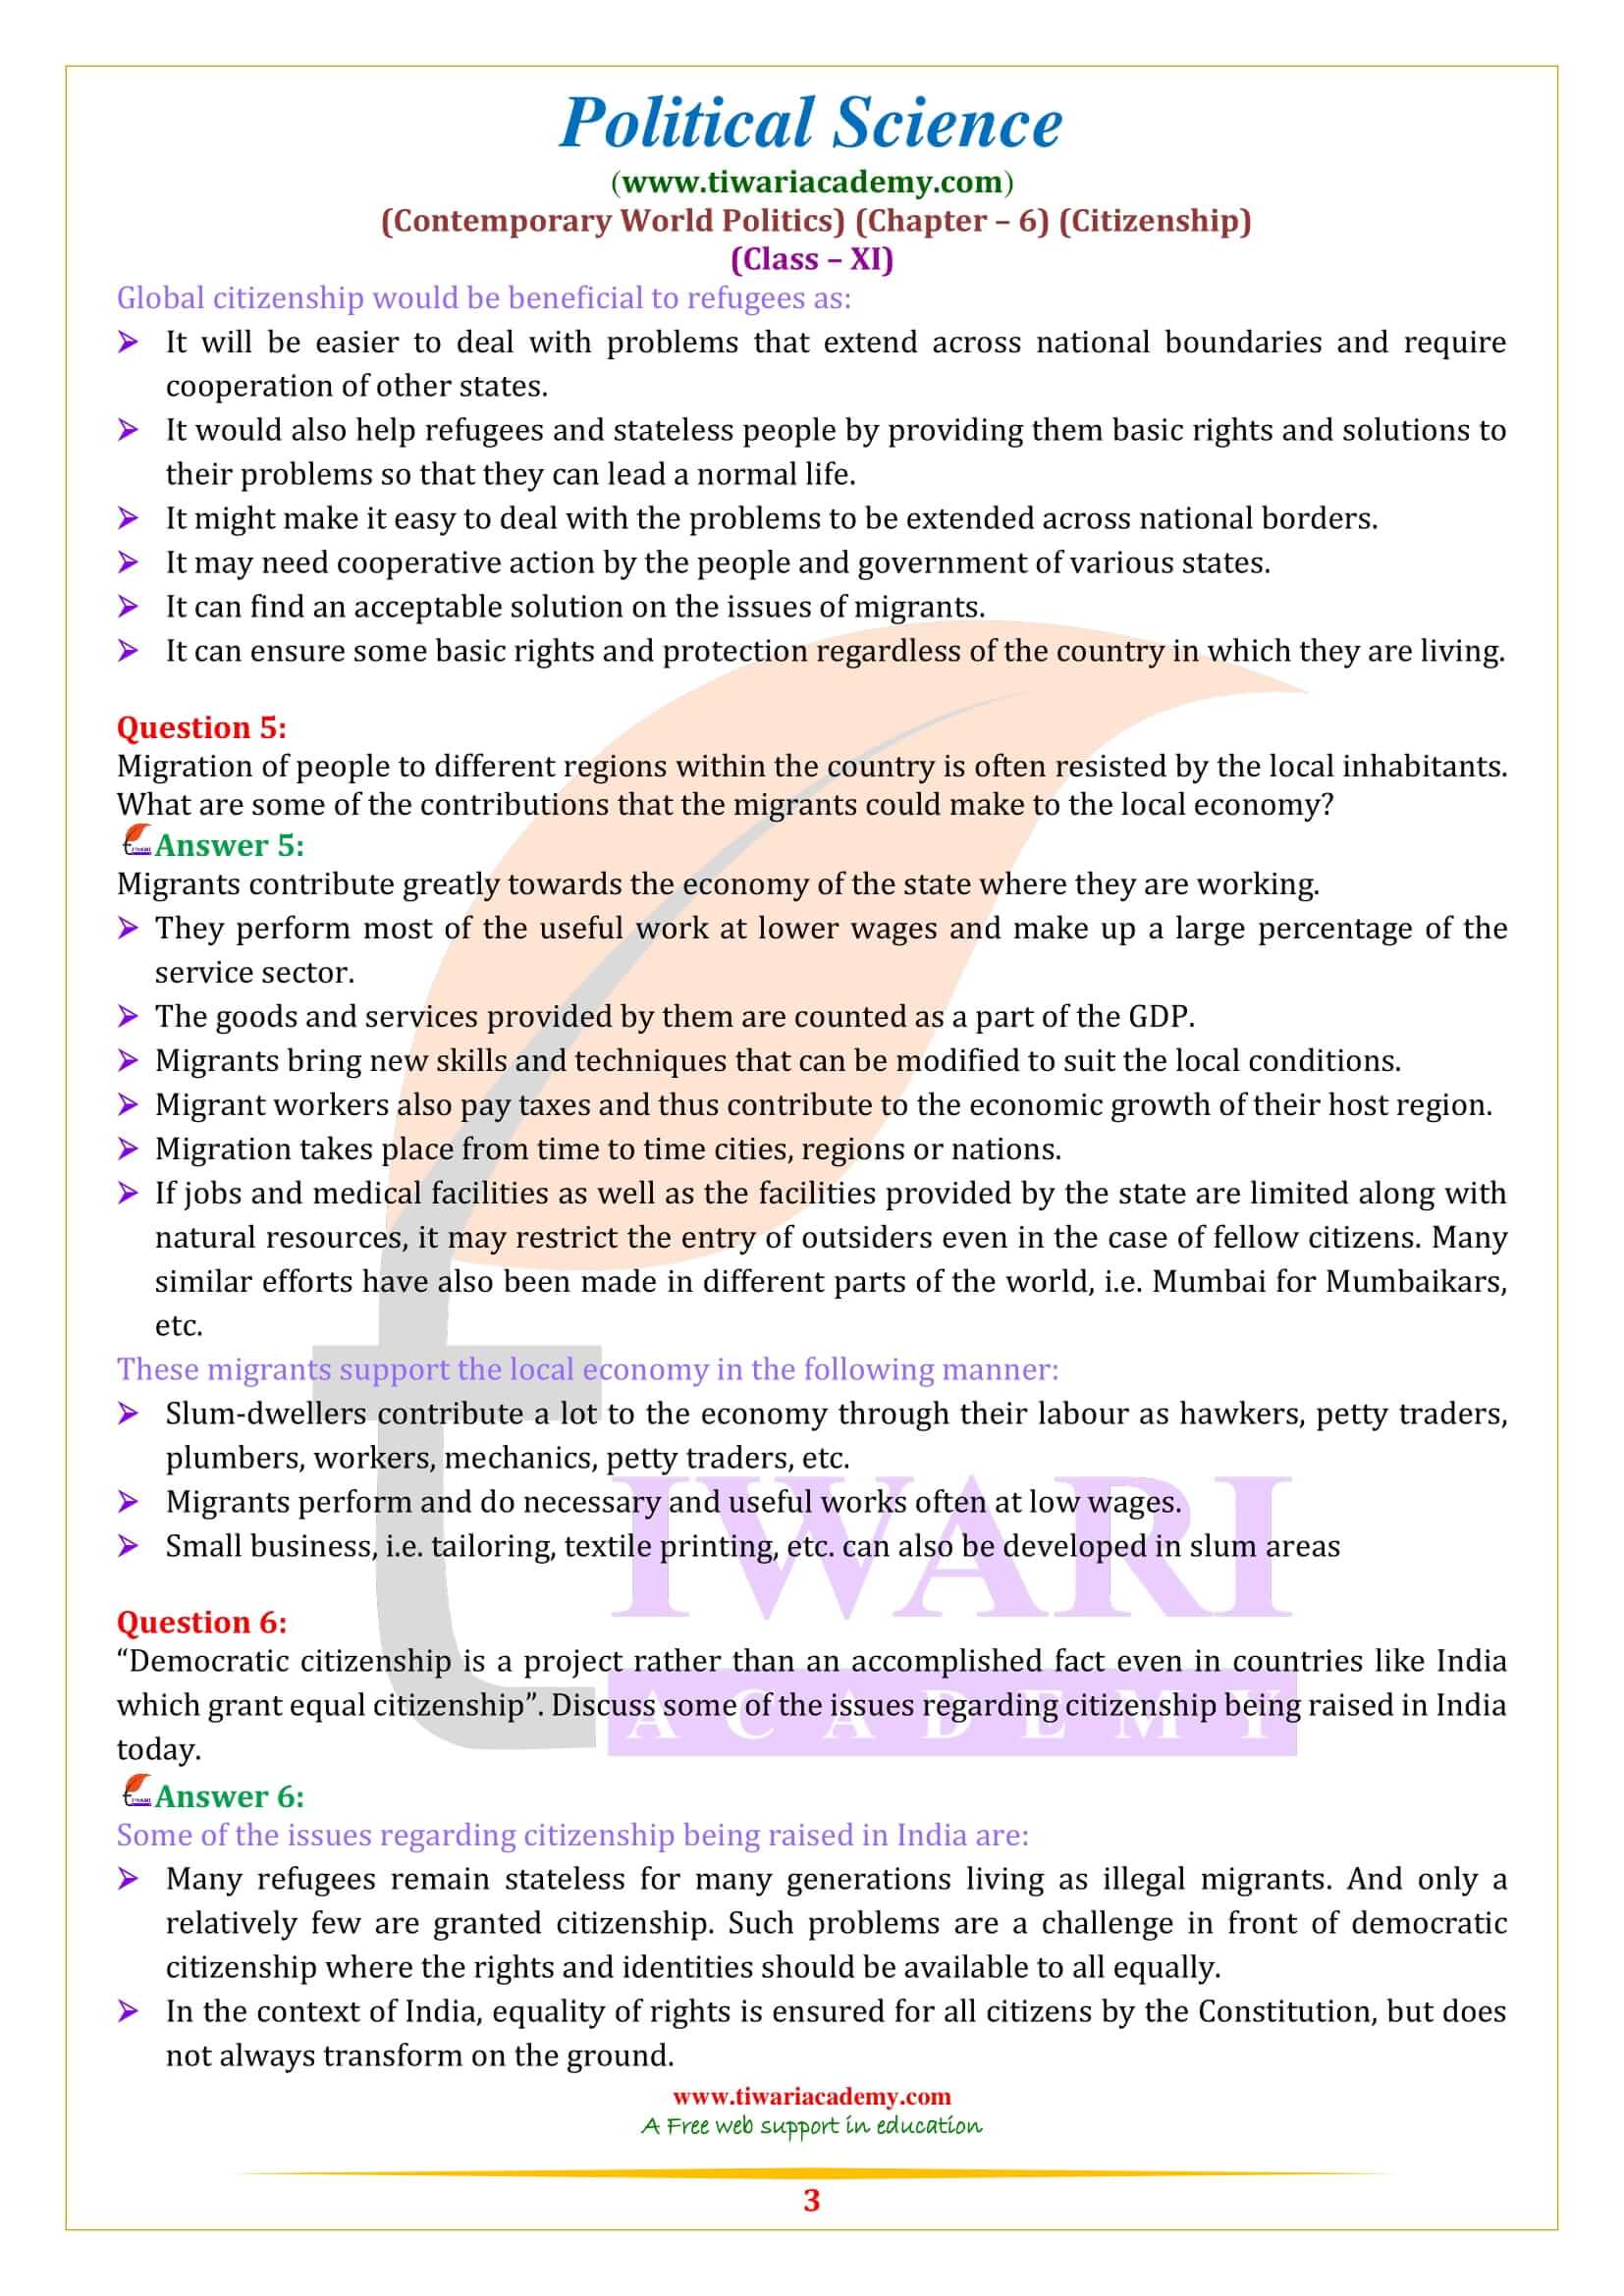 NCERT Solutions for Class 11 Political Science Chapter 6 in English Medium